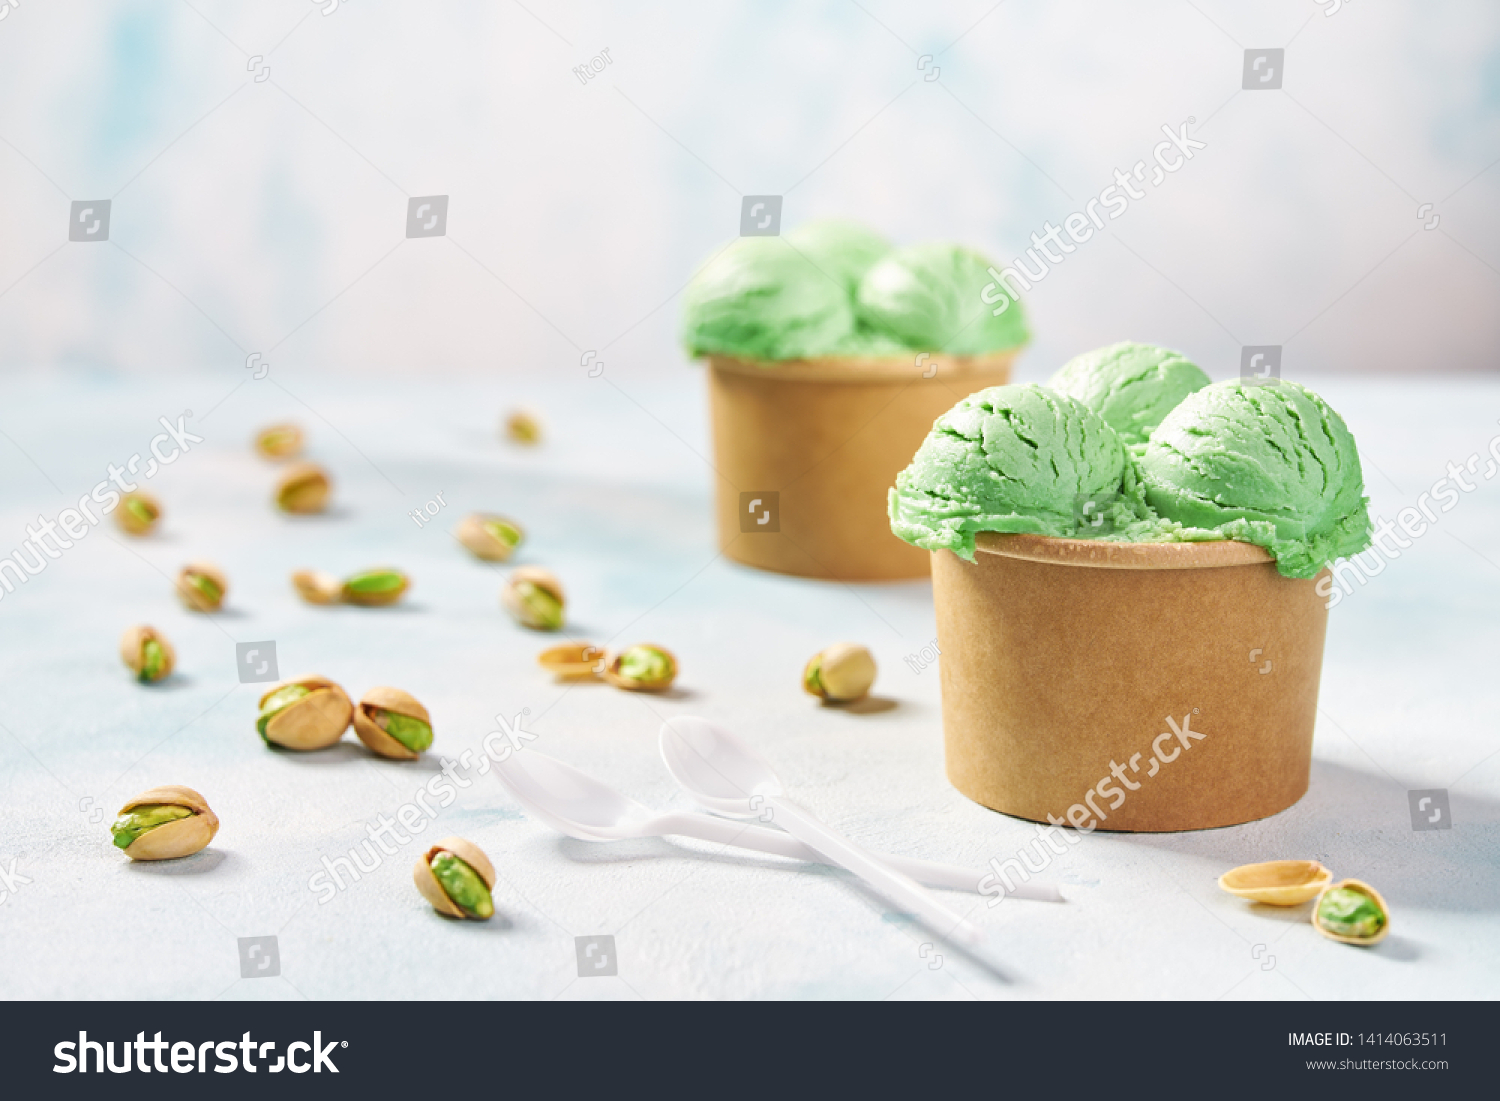 Download Pistachio Ice Cream Paper Cup On Stock Photo Edit Now 1414063511 PSD Mockup Templates